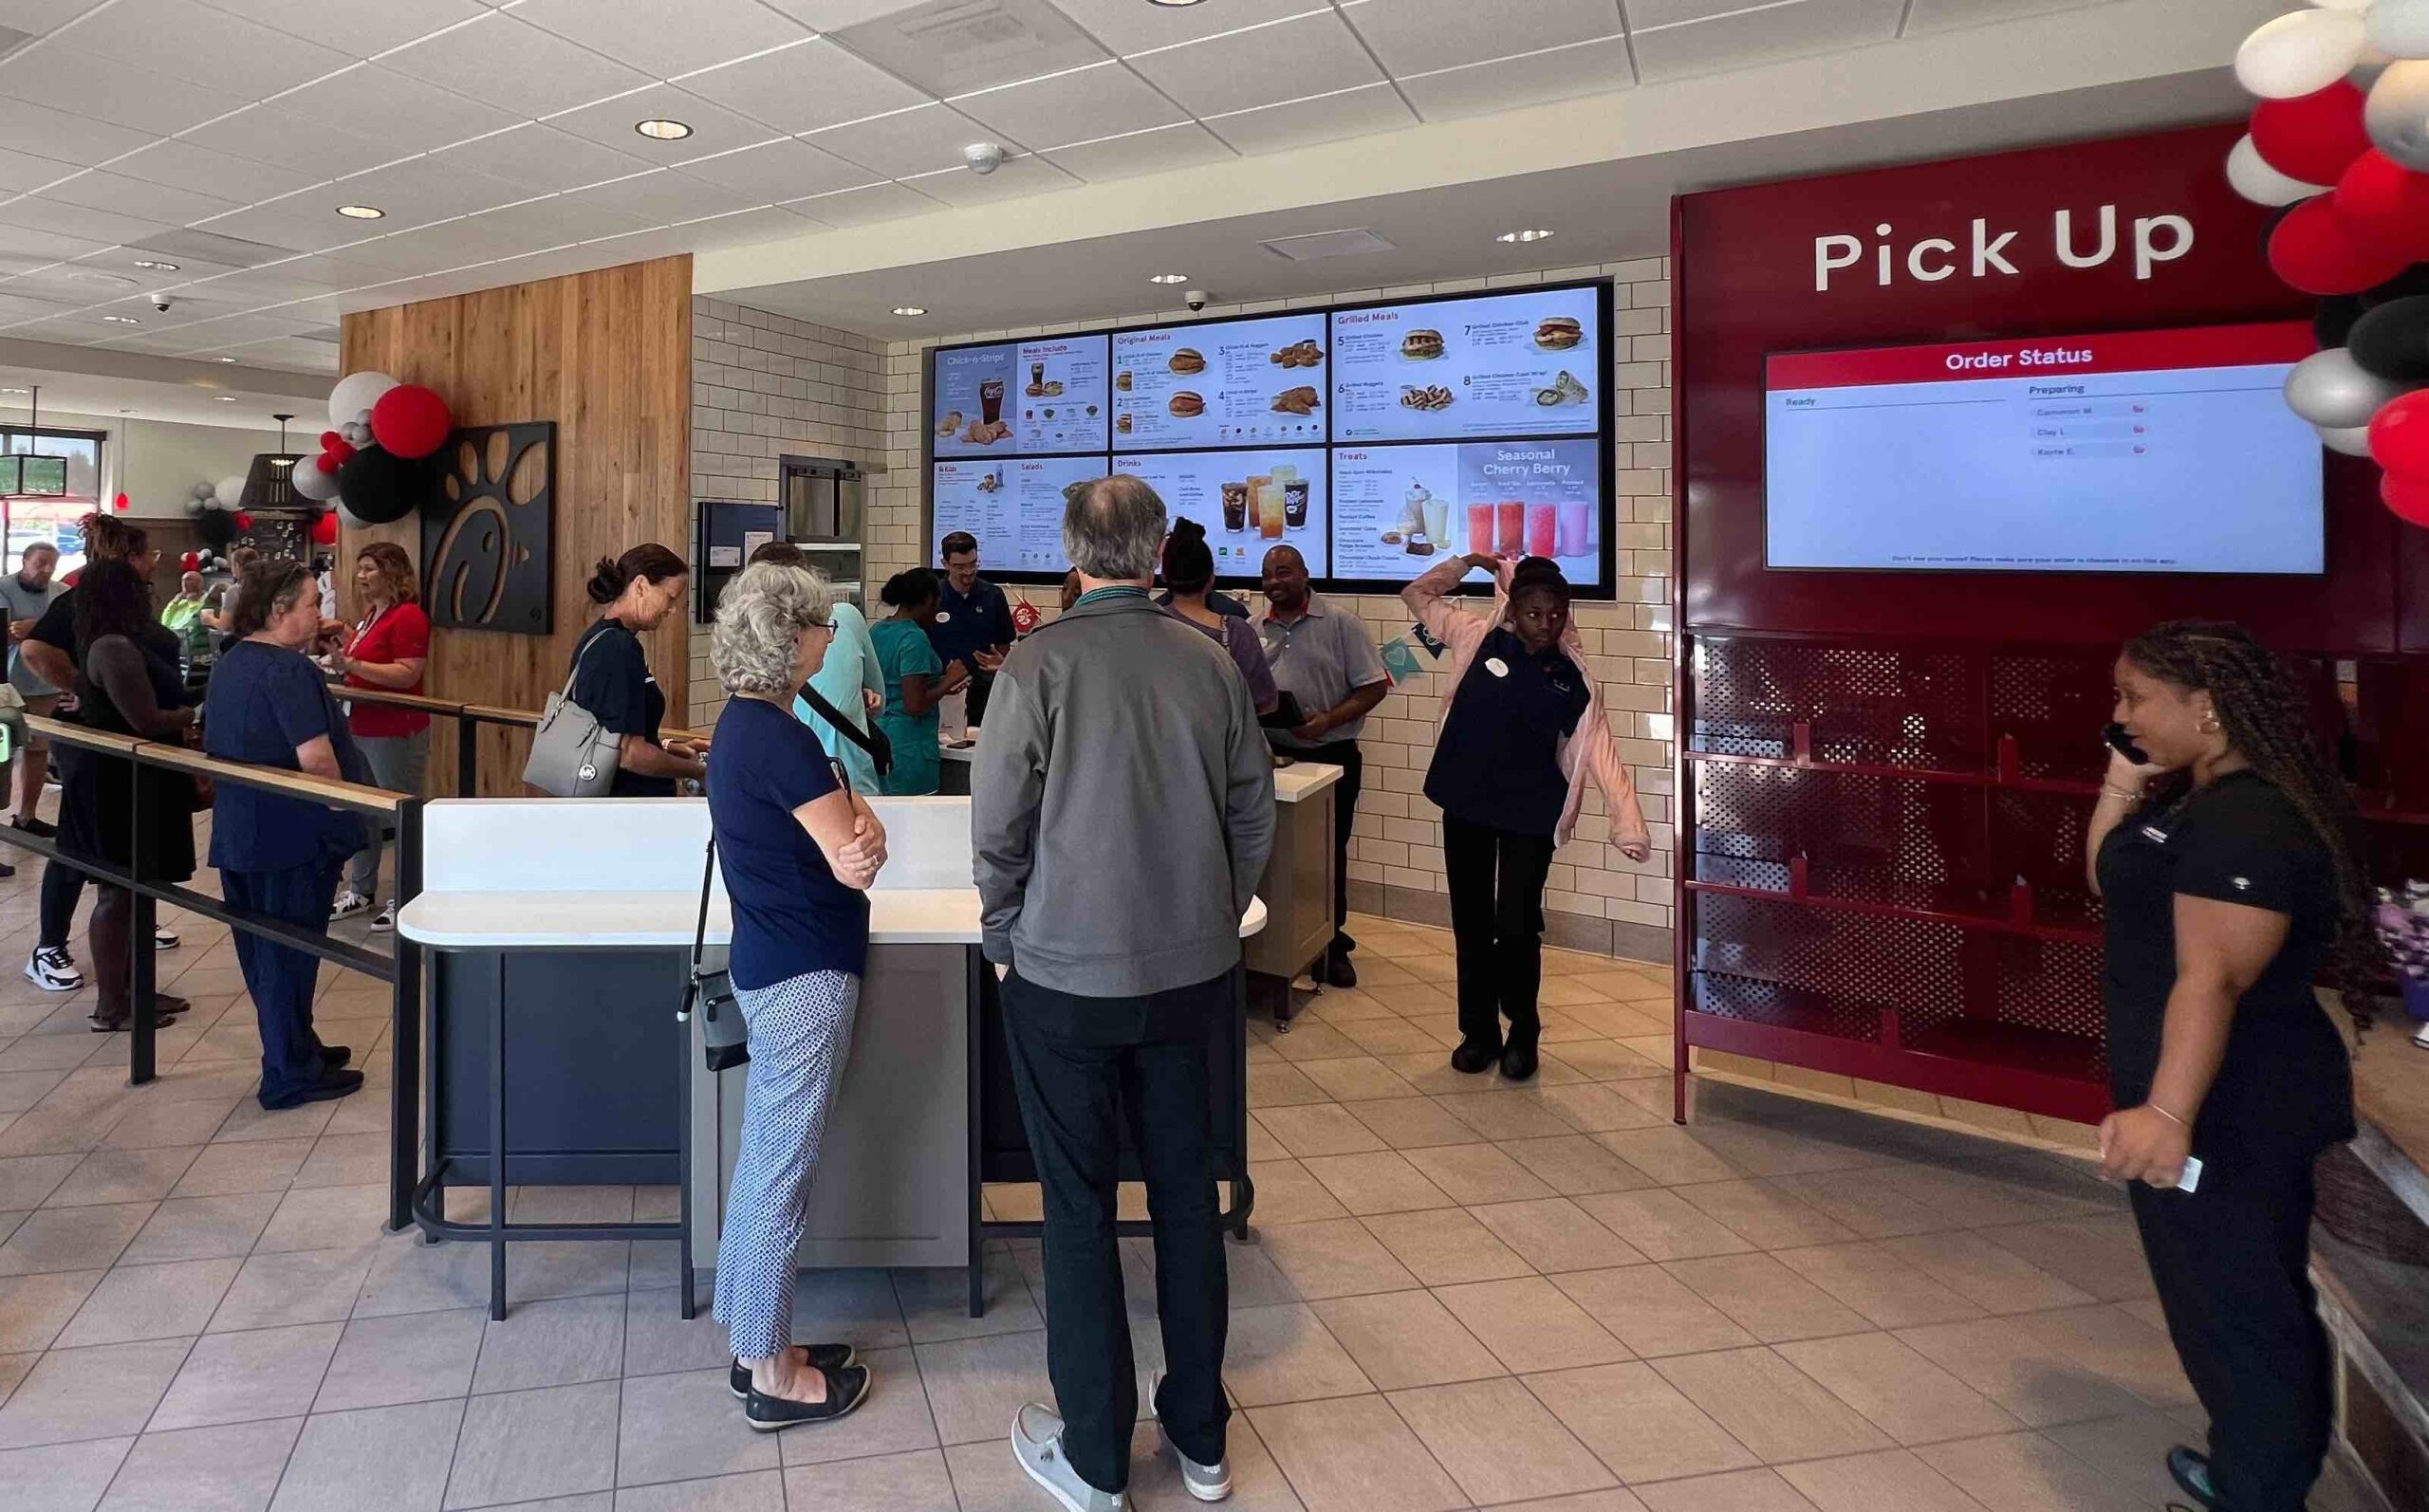 Customers lined up inside the new Chick fil A in Leesburg